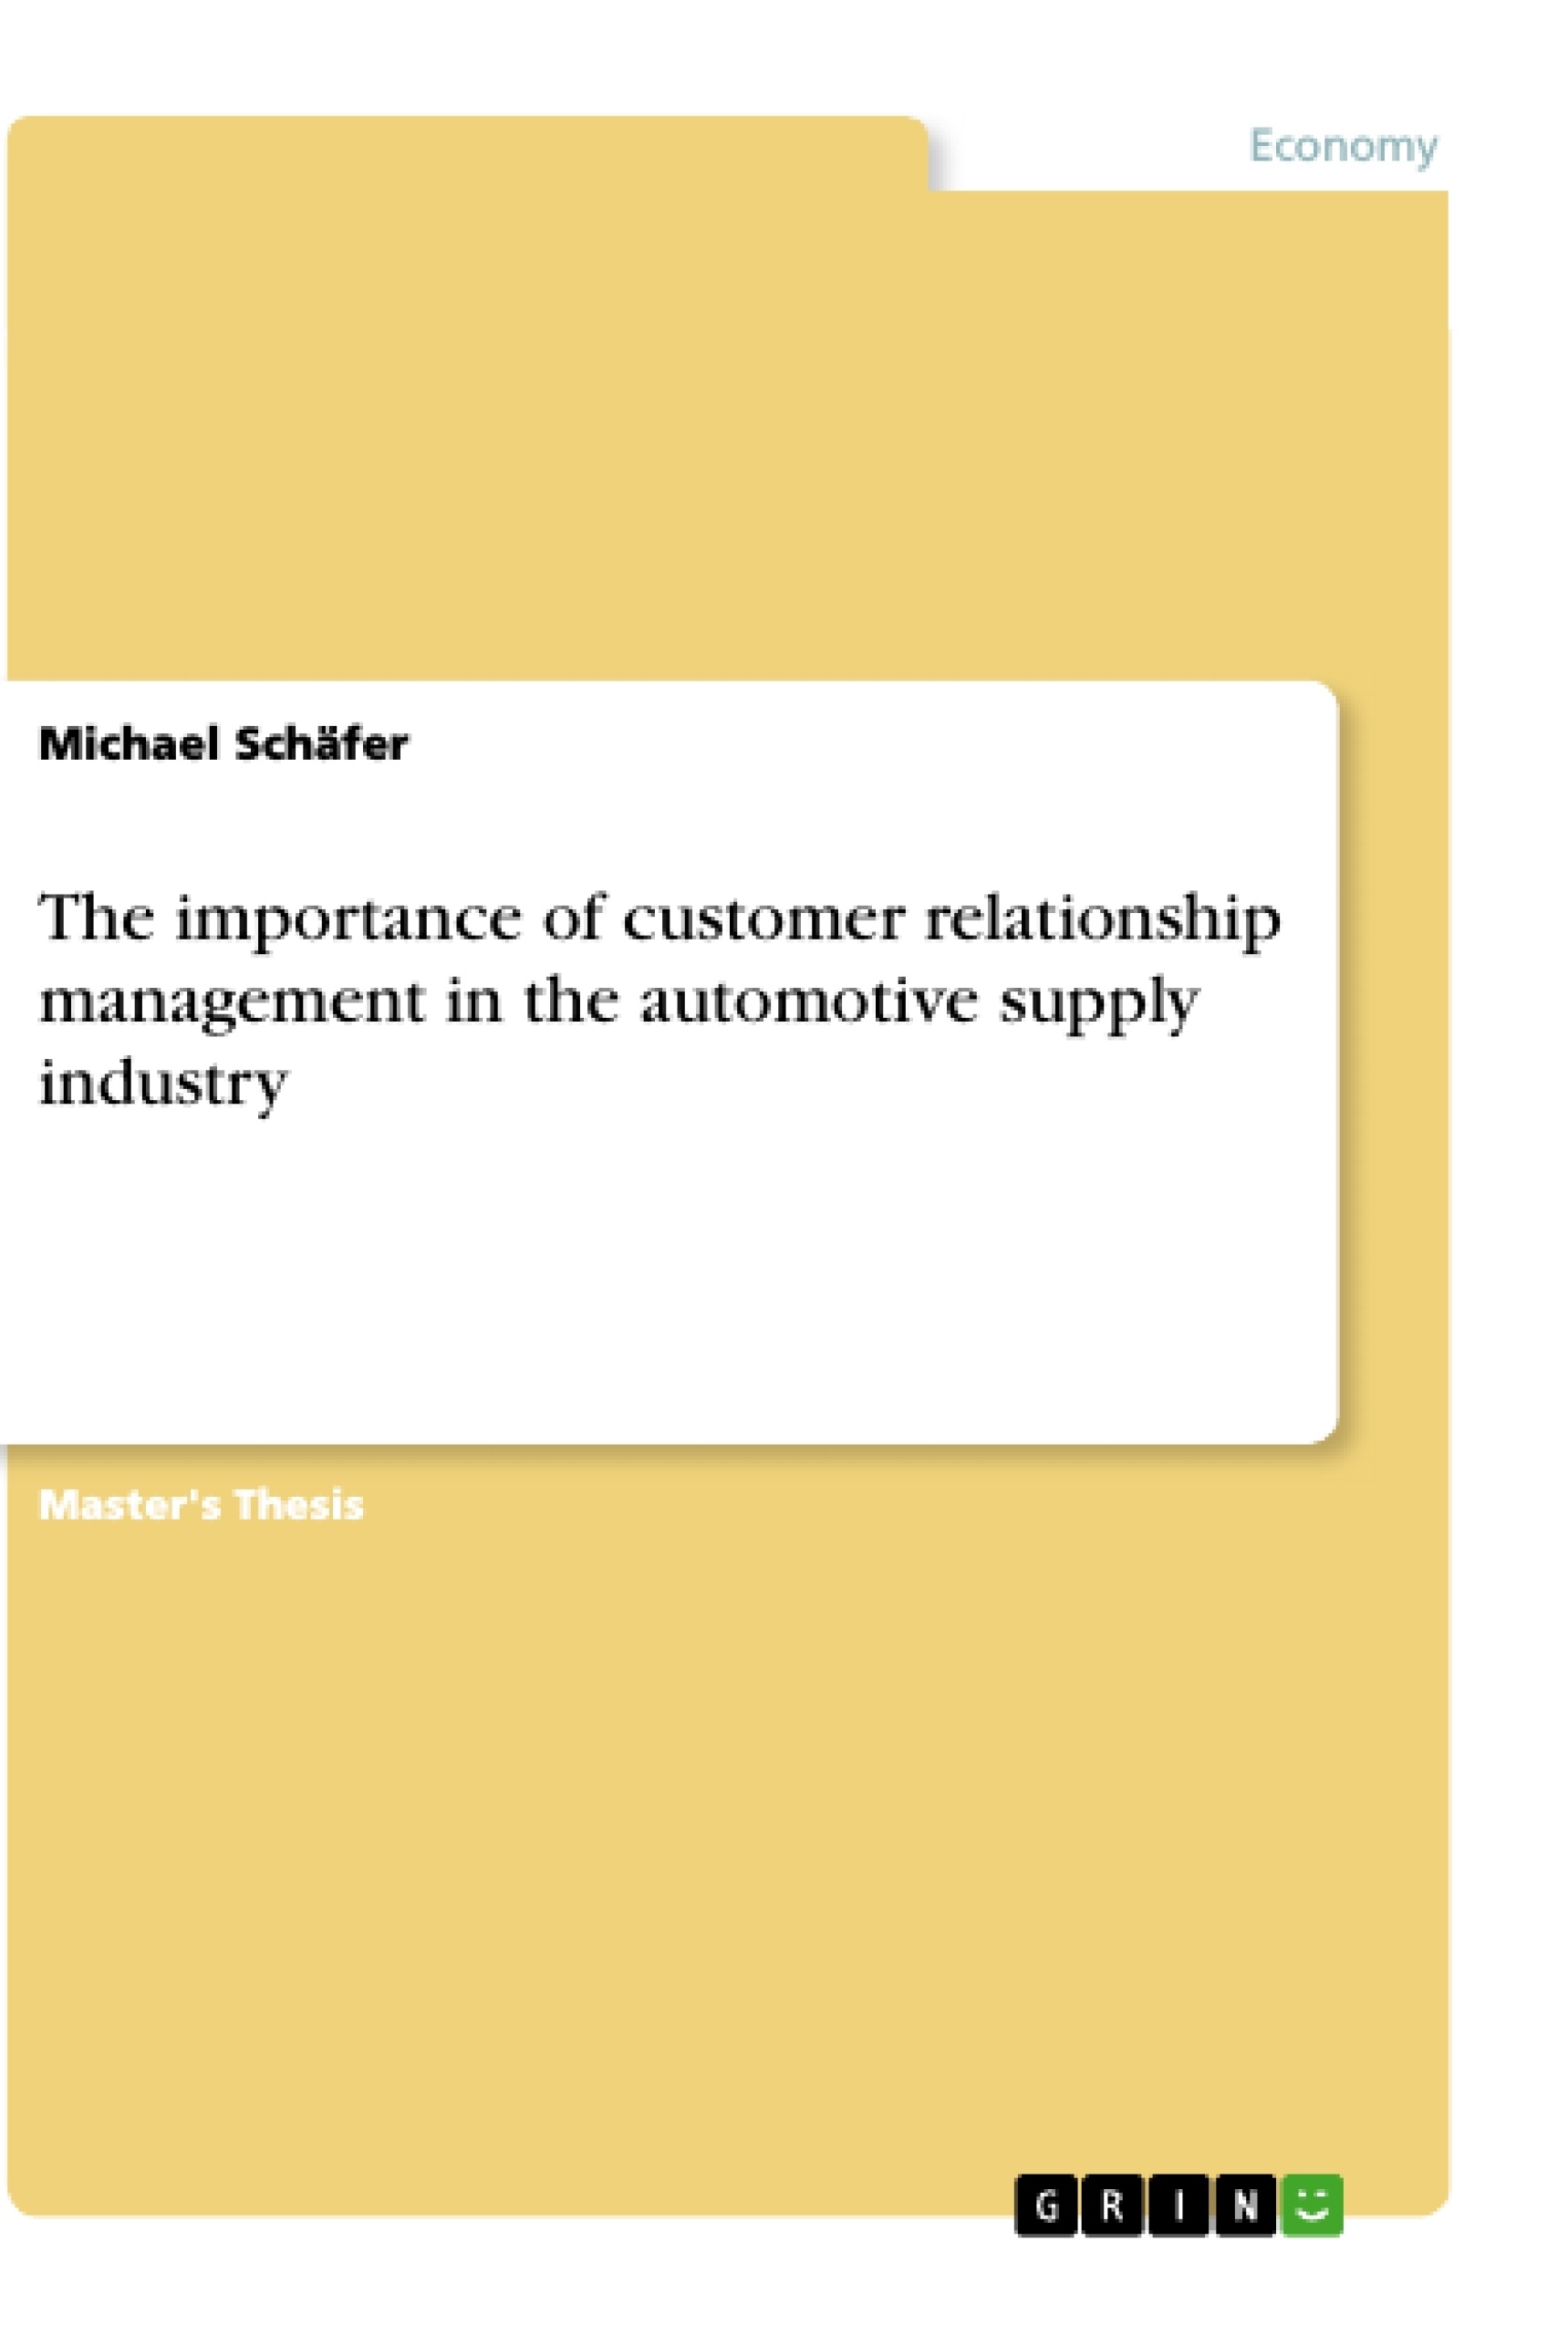 Title: The importance of customer relationship management in the automotive supply industry